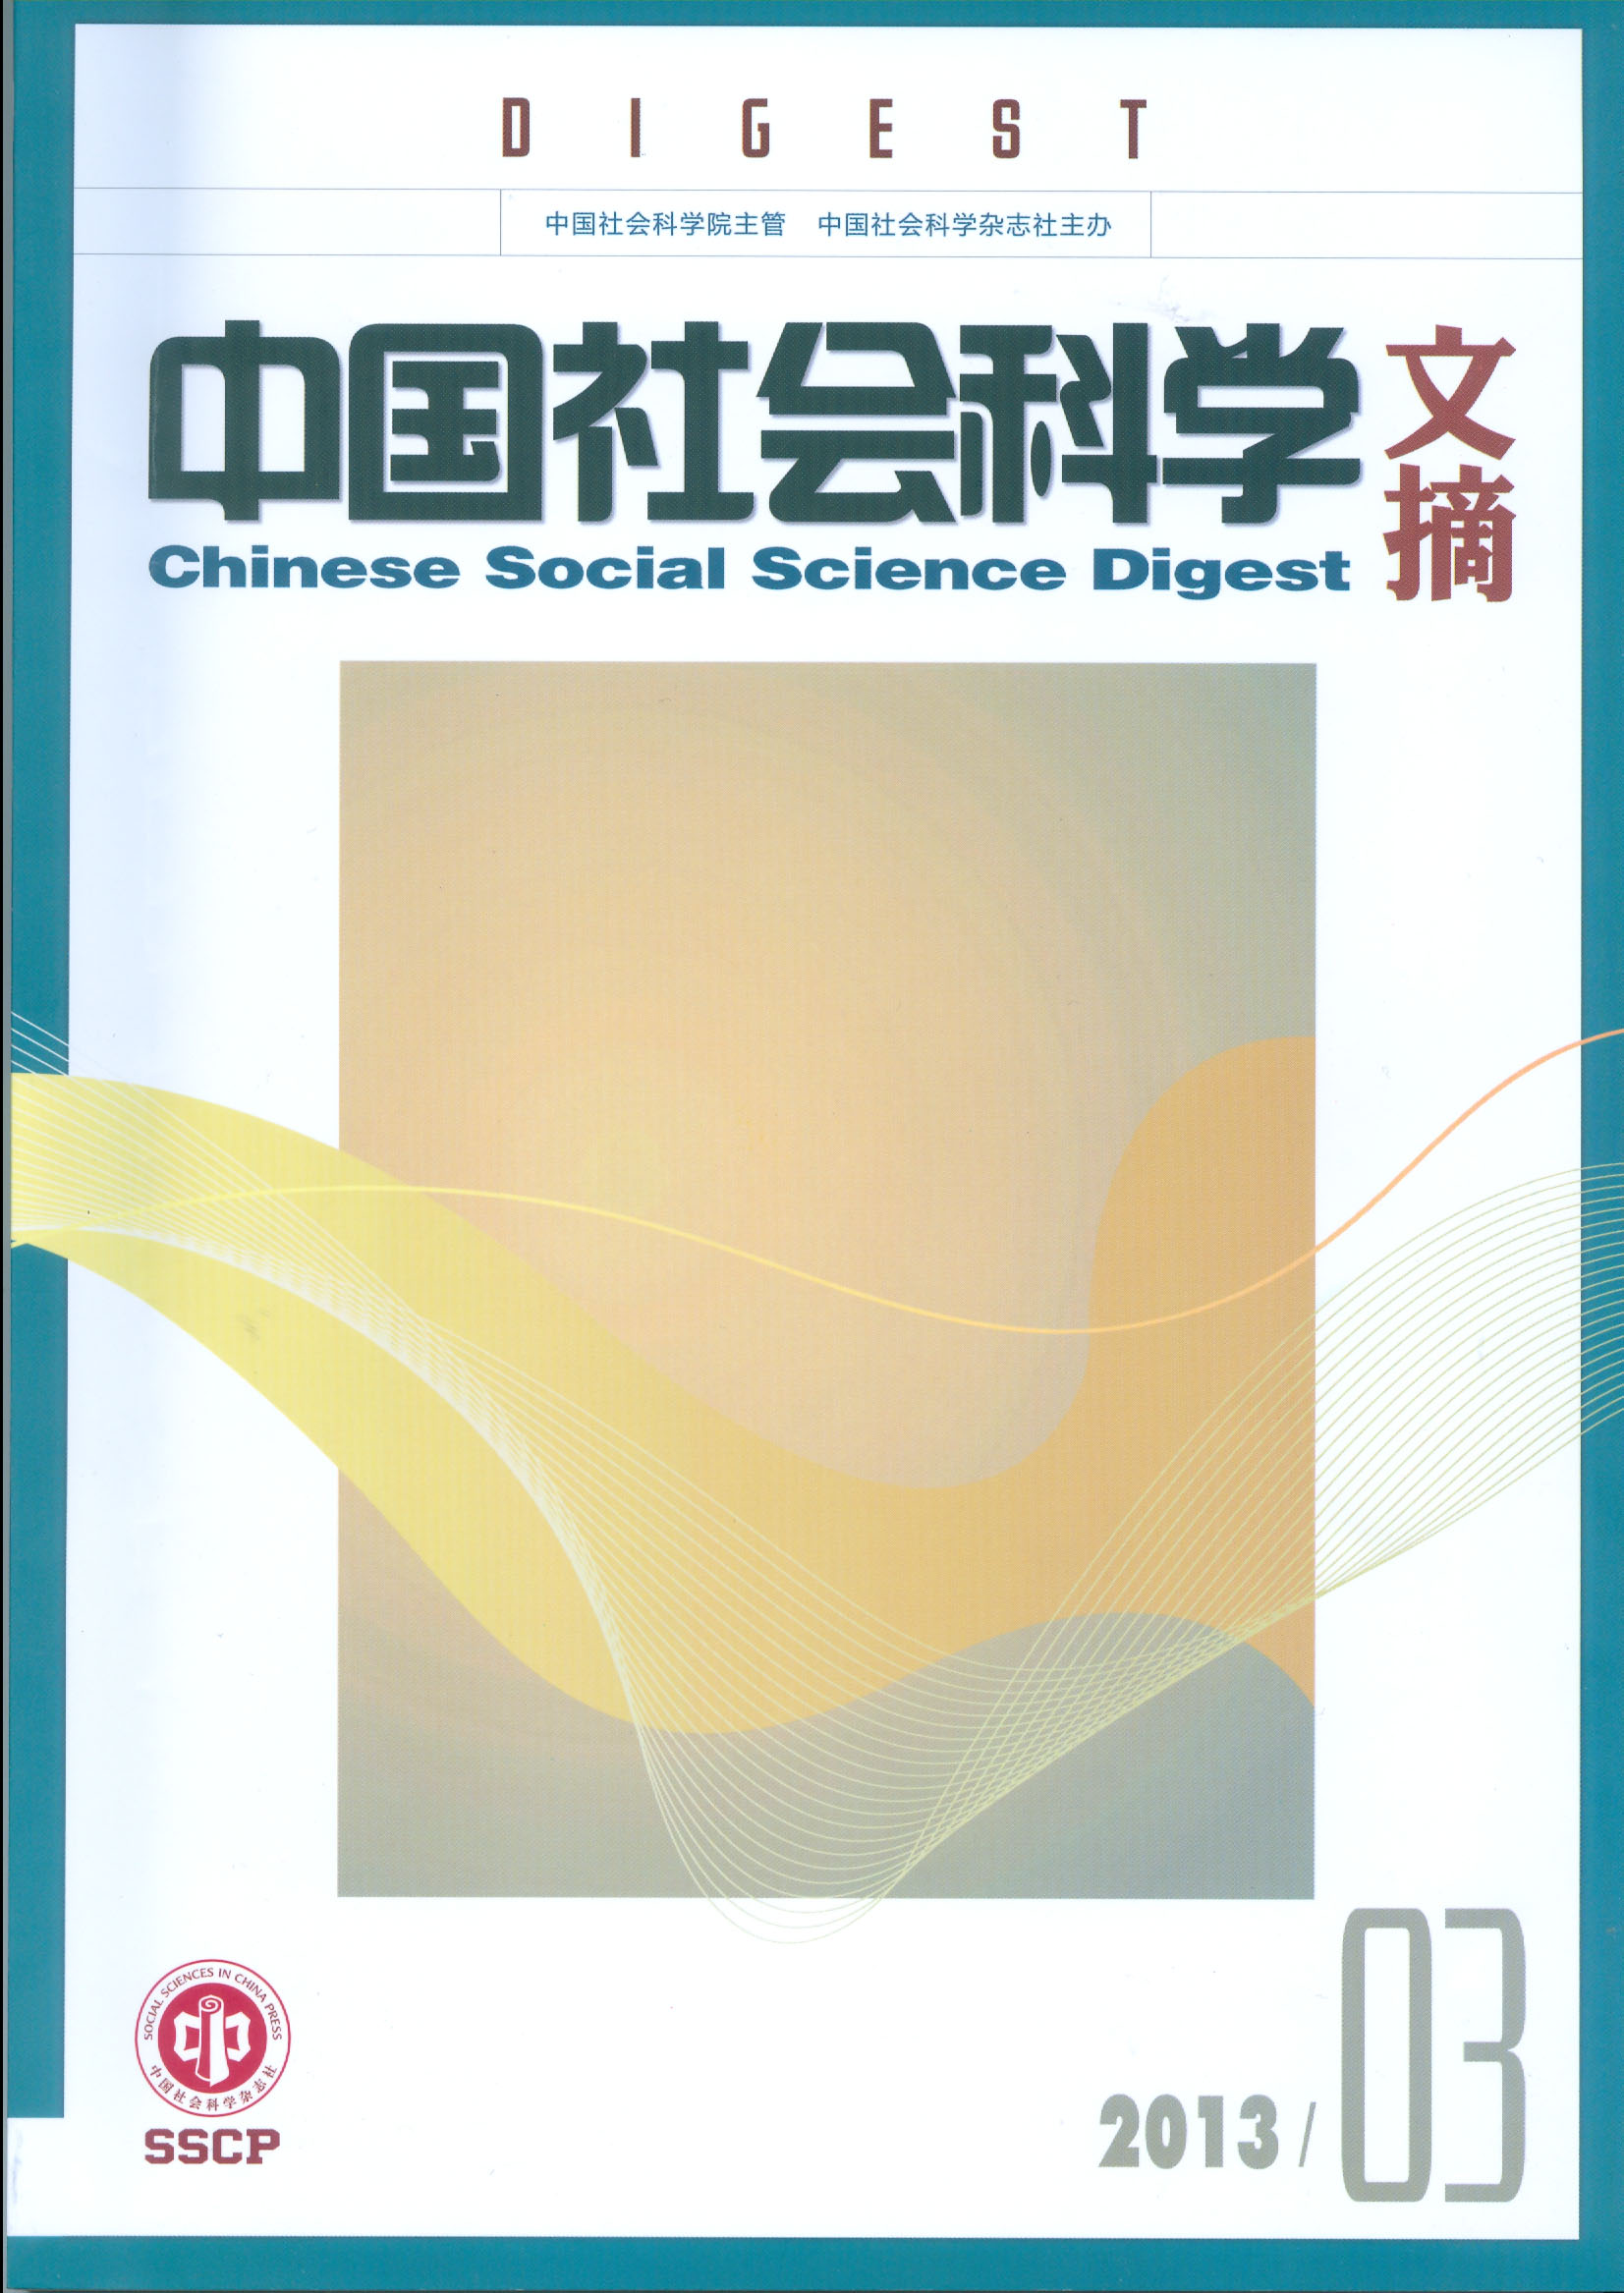 Chinese Social Science Digest